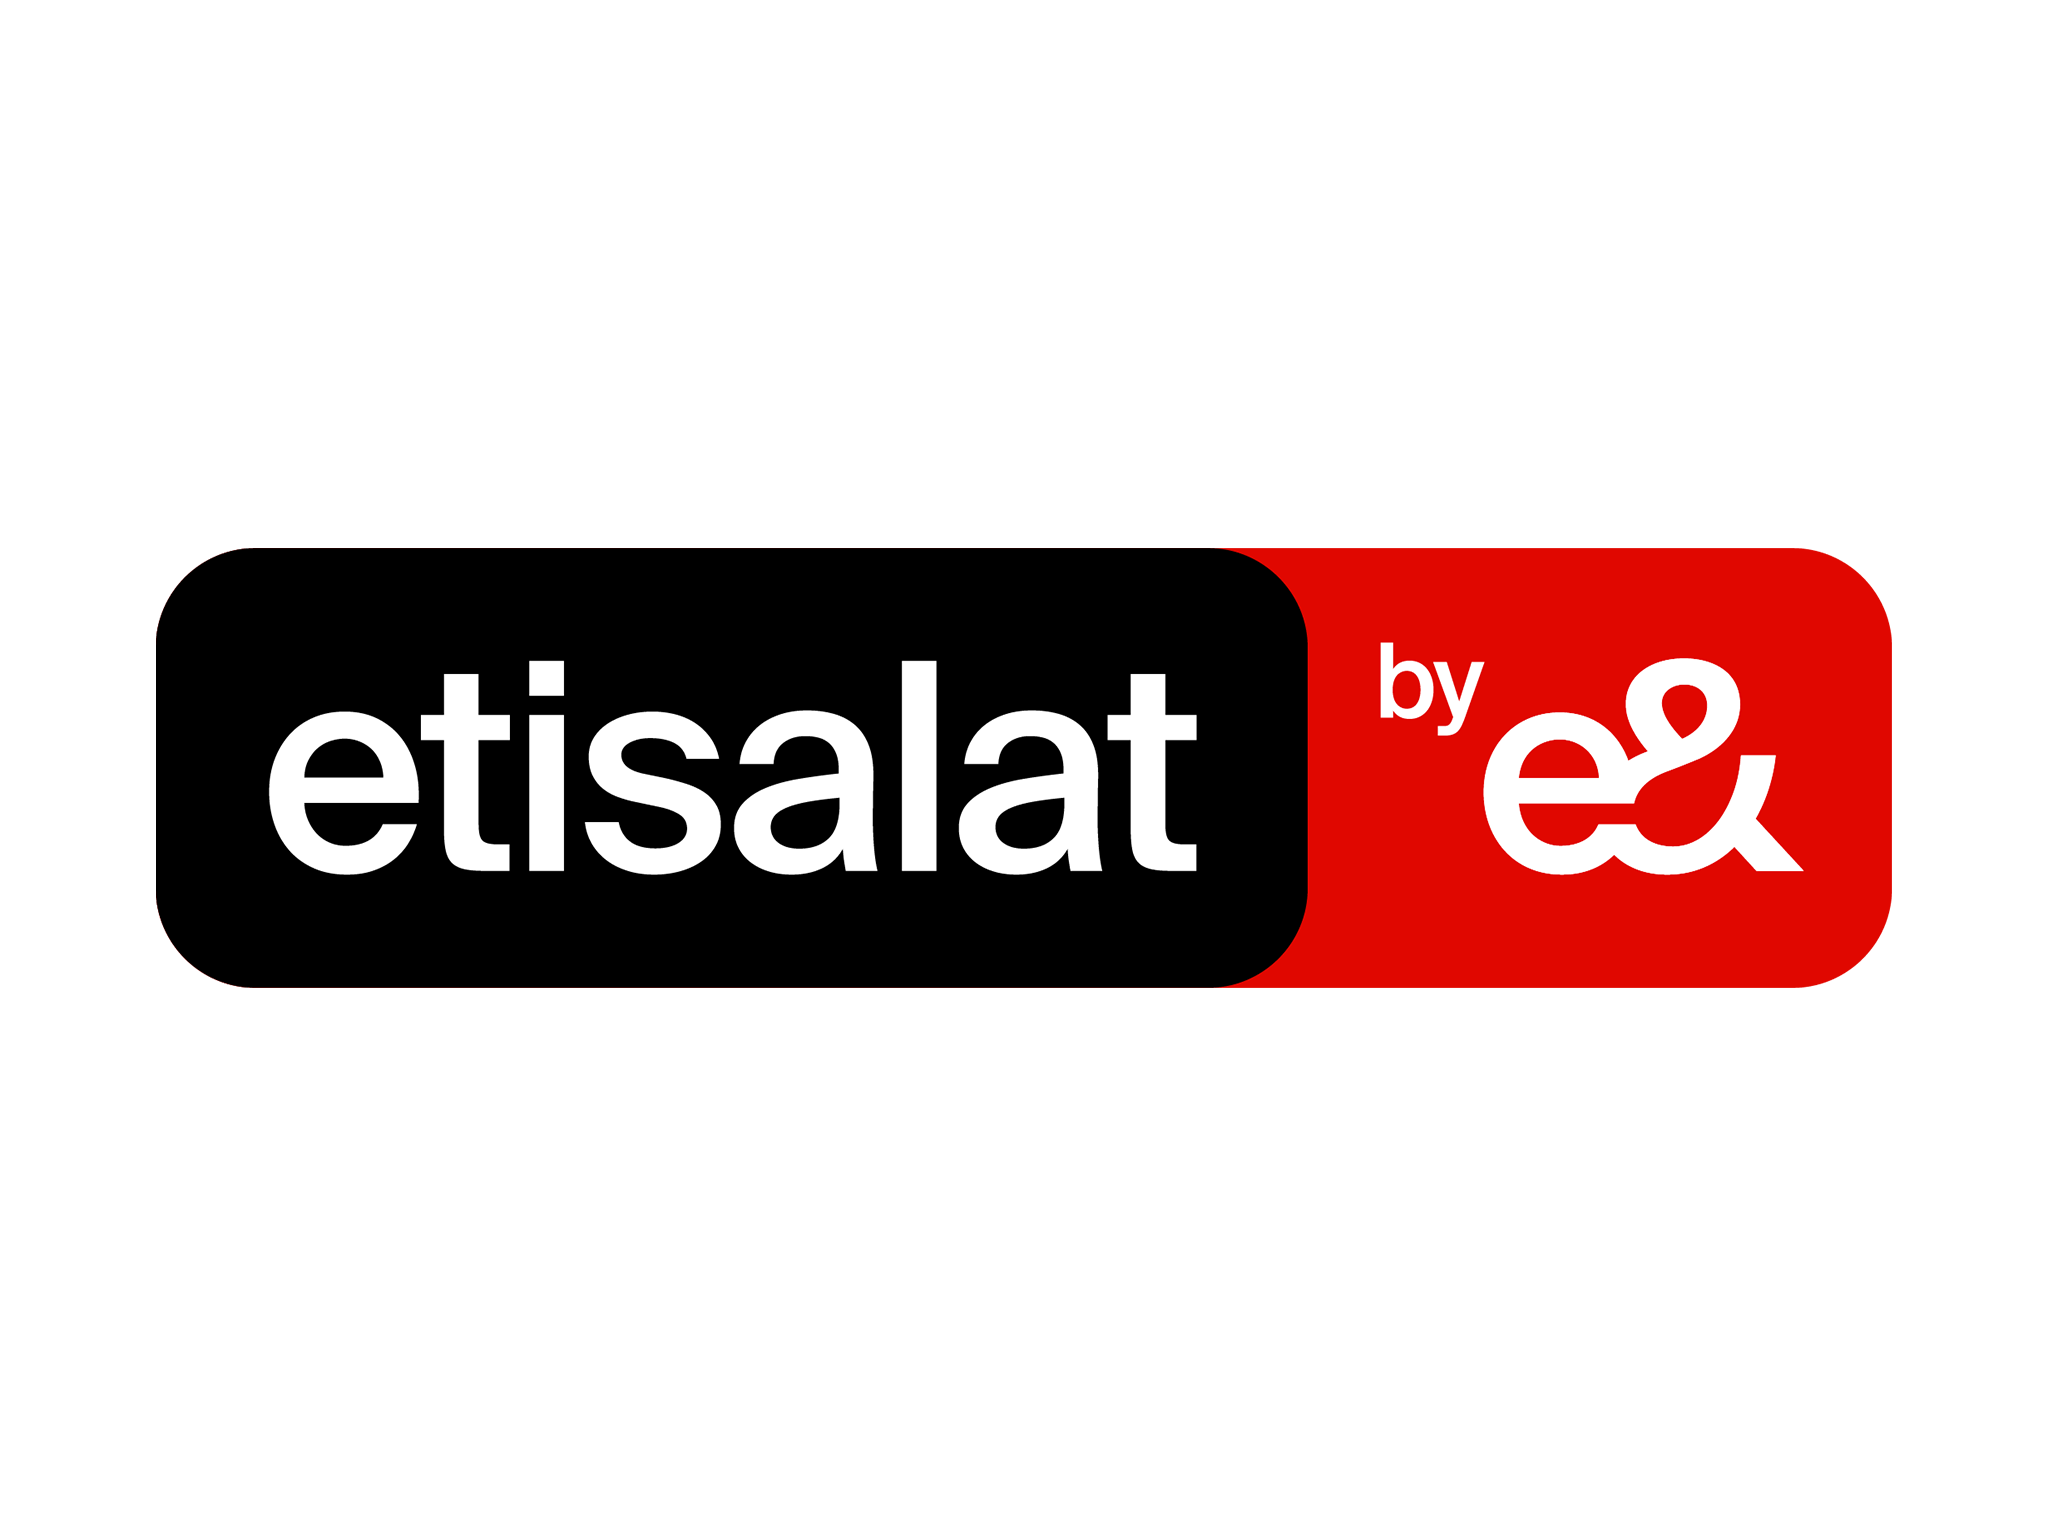 Black and red Etisalat by e& logo